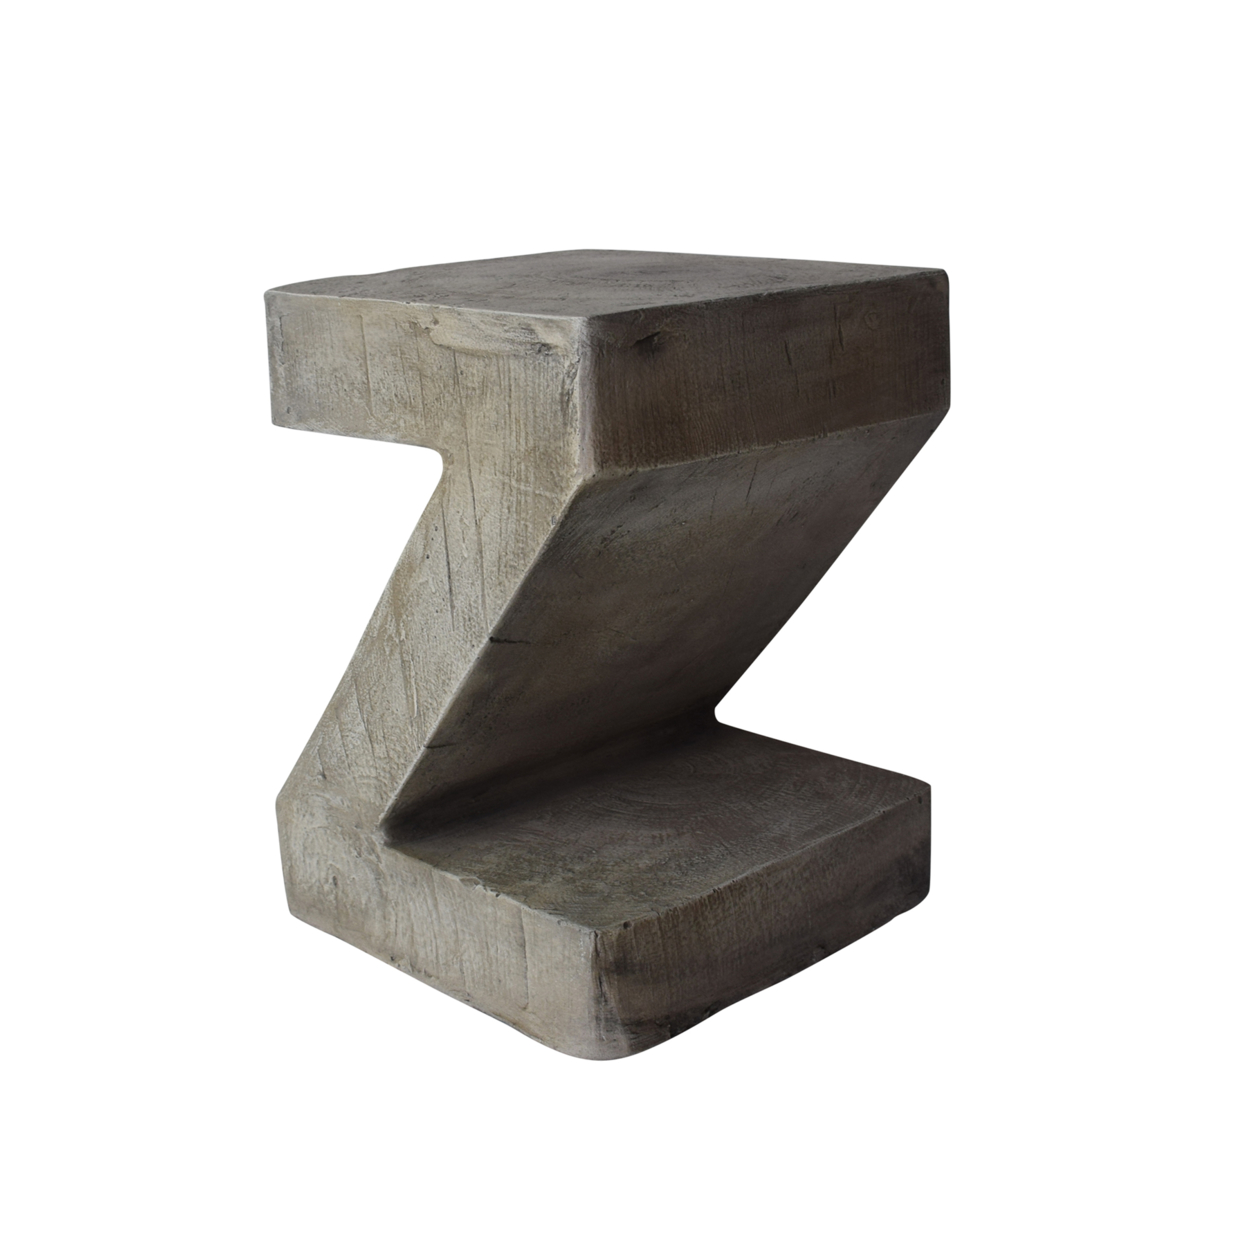 Jingle Outdoor Light-Weight Concrete Accent Table - Light Gray